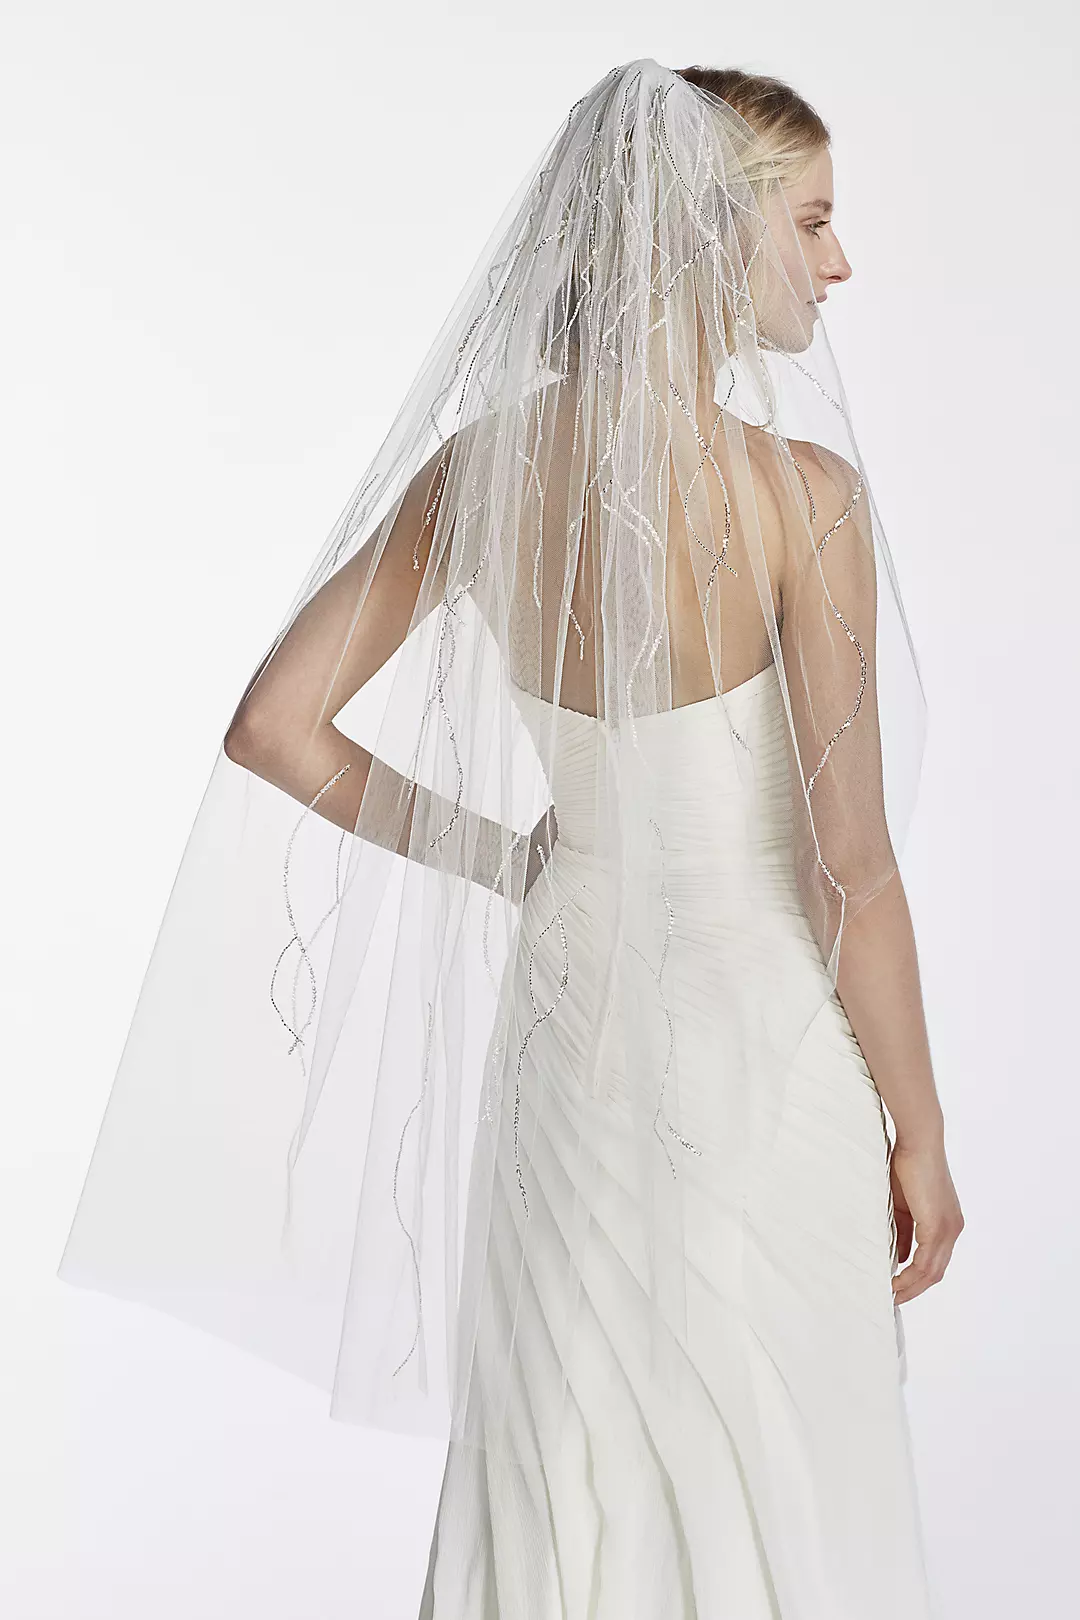 One Tier Mid Length Veil with Beaded Linear Image